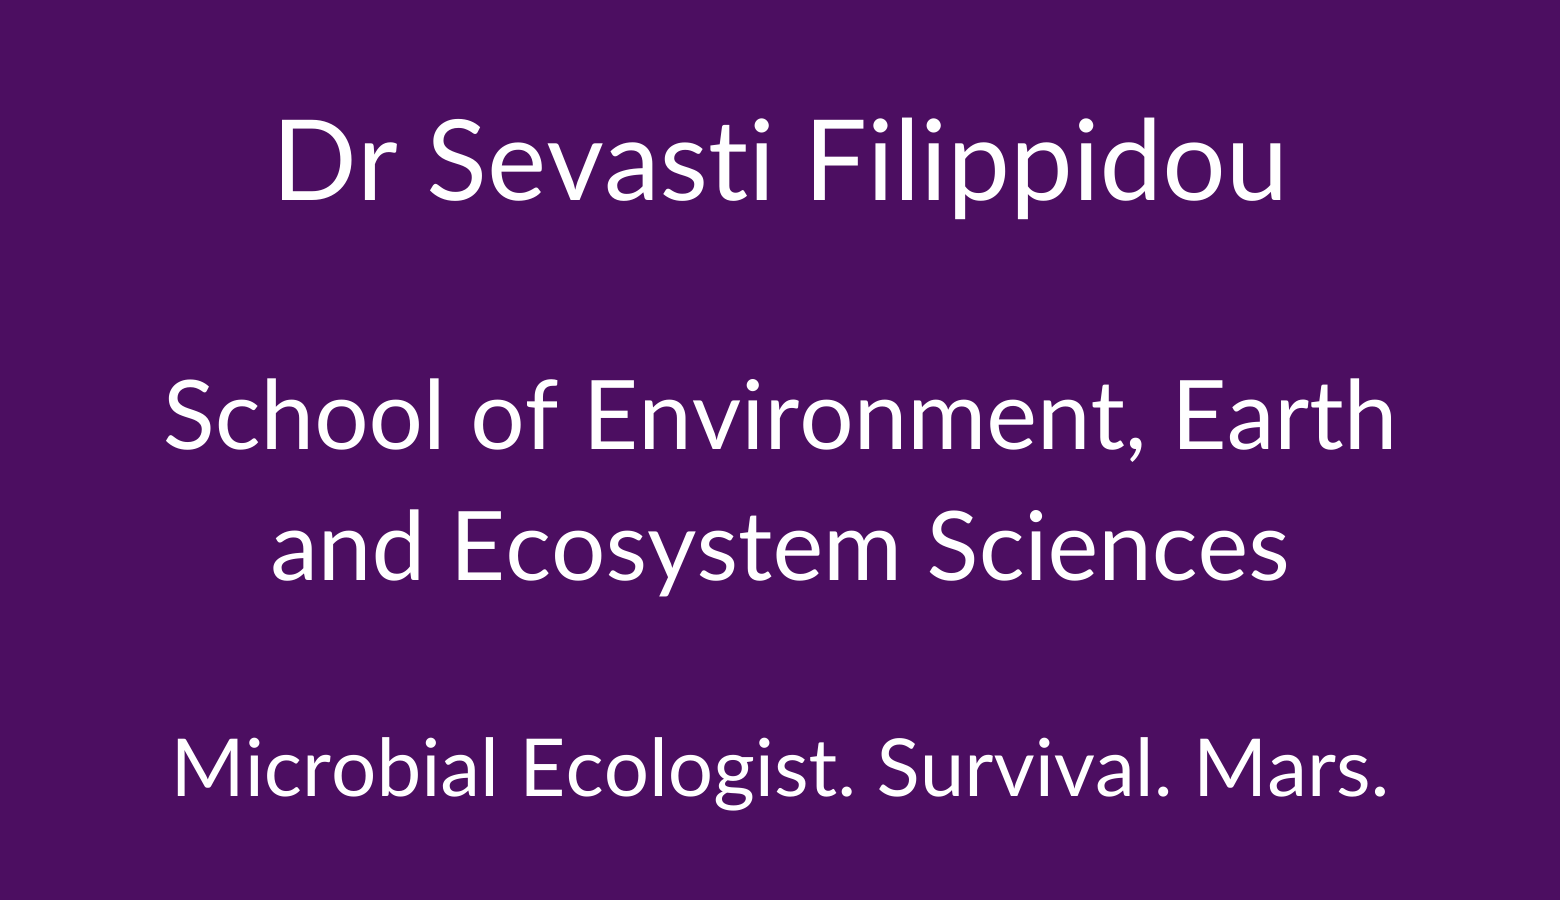 Dr Sevasti Filippidou. School of Environment, Earth and Ecosystem Sciences. Microbial Ecologist. Survival. Mars.